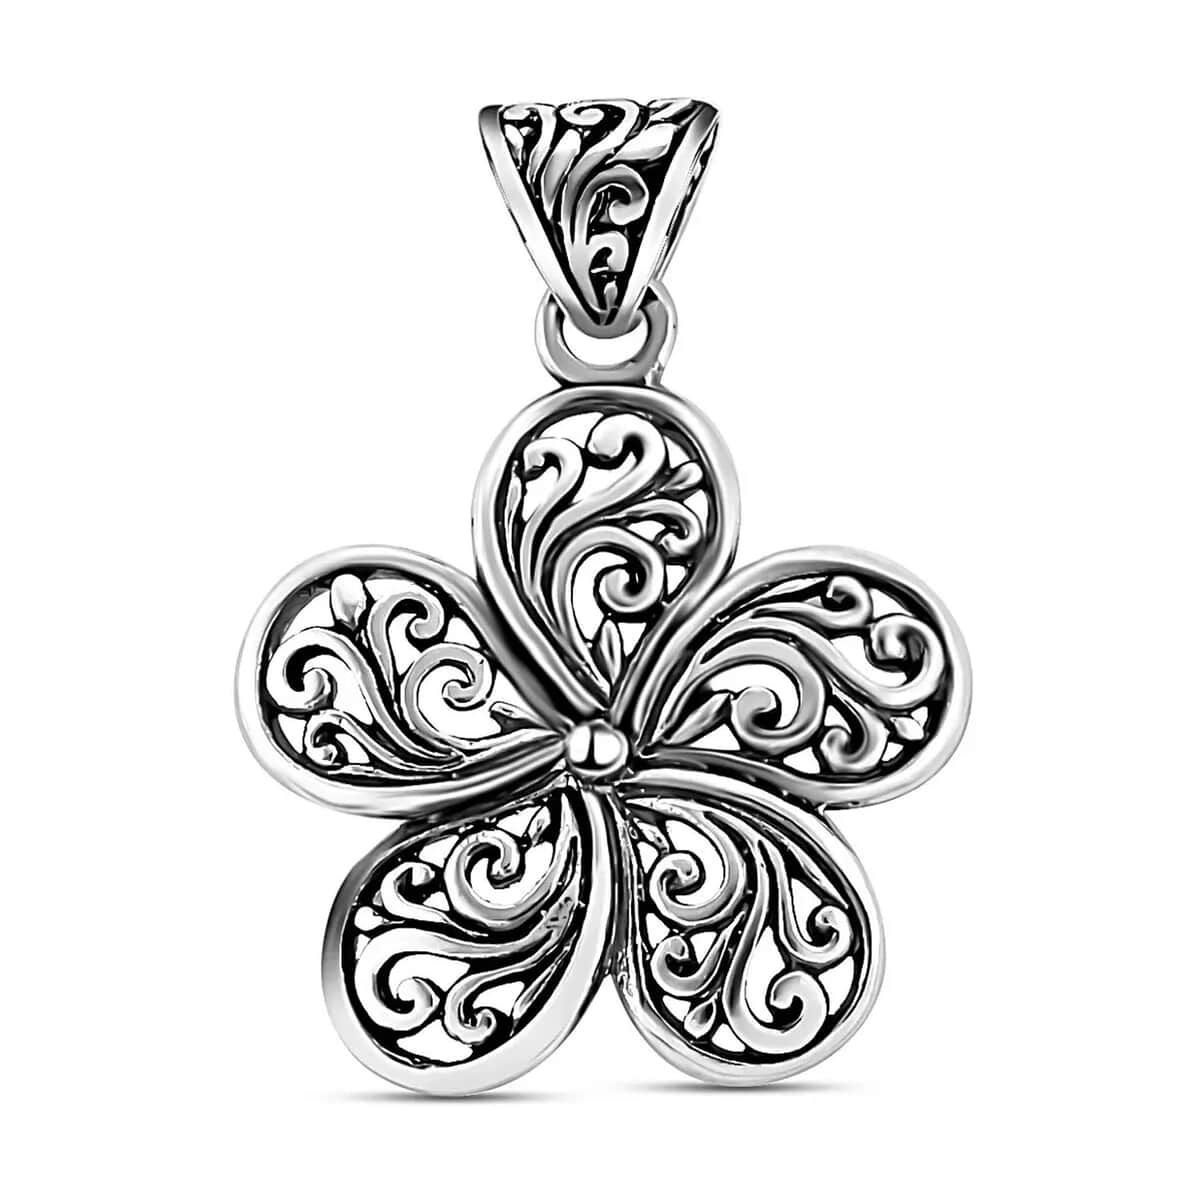 Mother’s Day Gift Bali Legacy Floral Pendant, Swirl Pendant, Silver Flower Pendant, Sterling Silver Pendant, Filigree Pendant 2.85 Grams image number 0